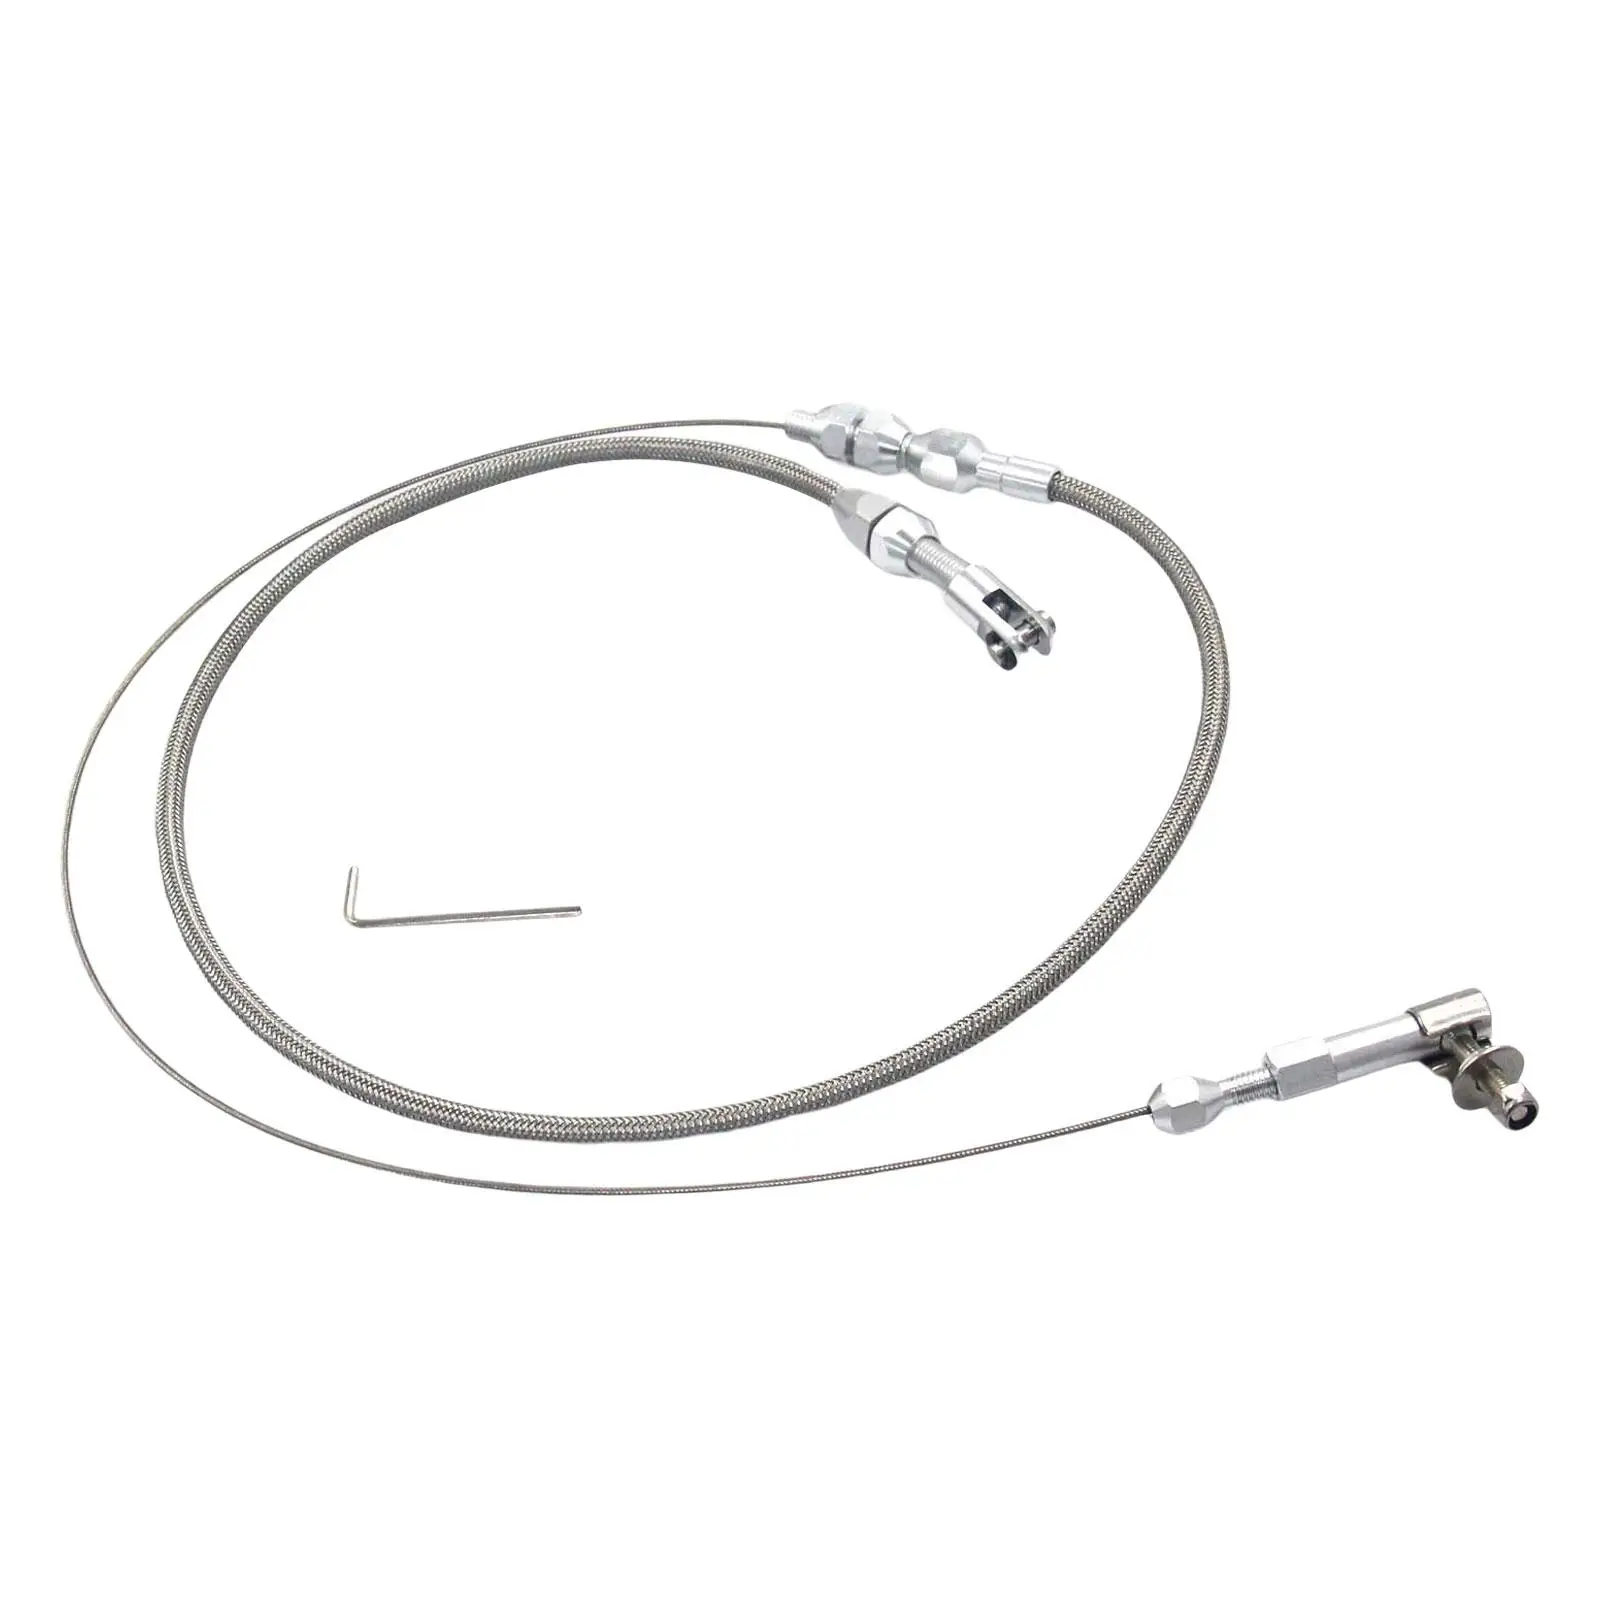 Throttle Cable 36in Premium Swap Throttle Line for Professional Parts